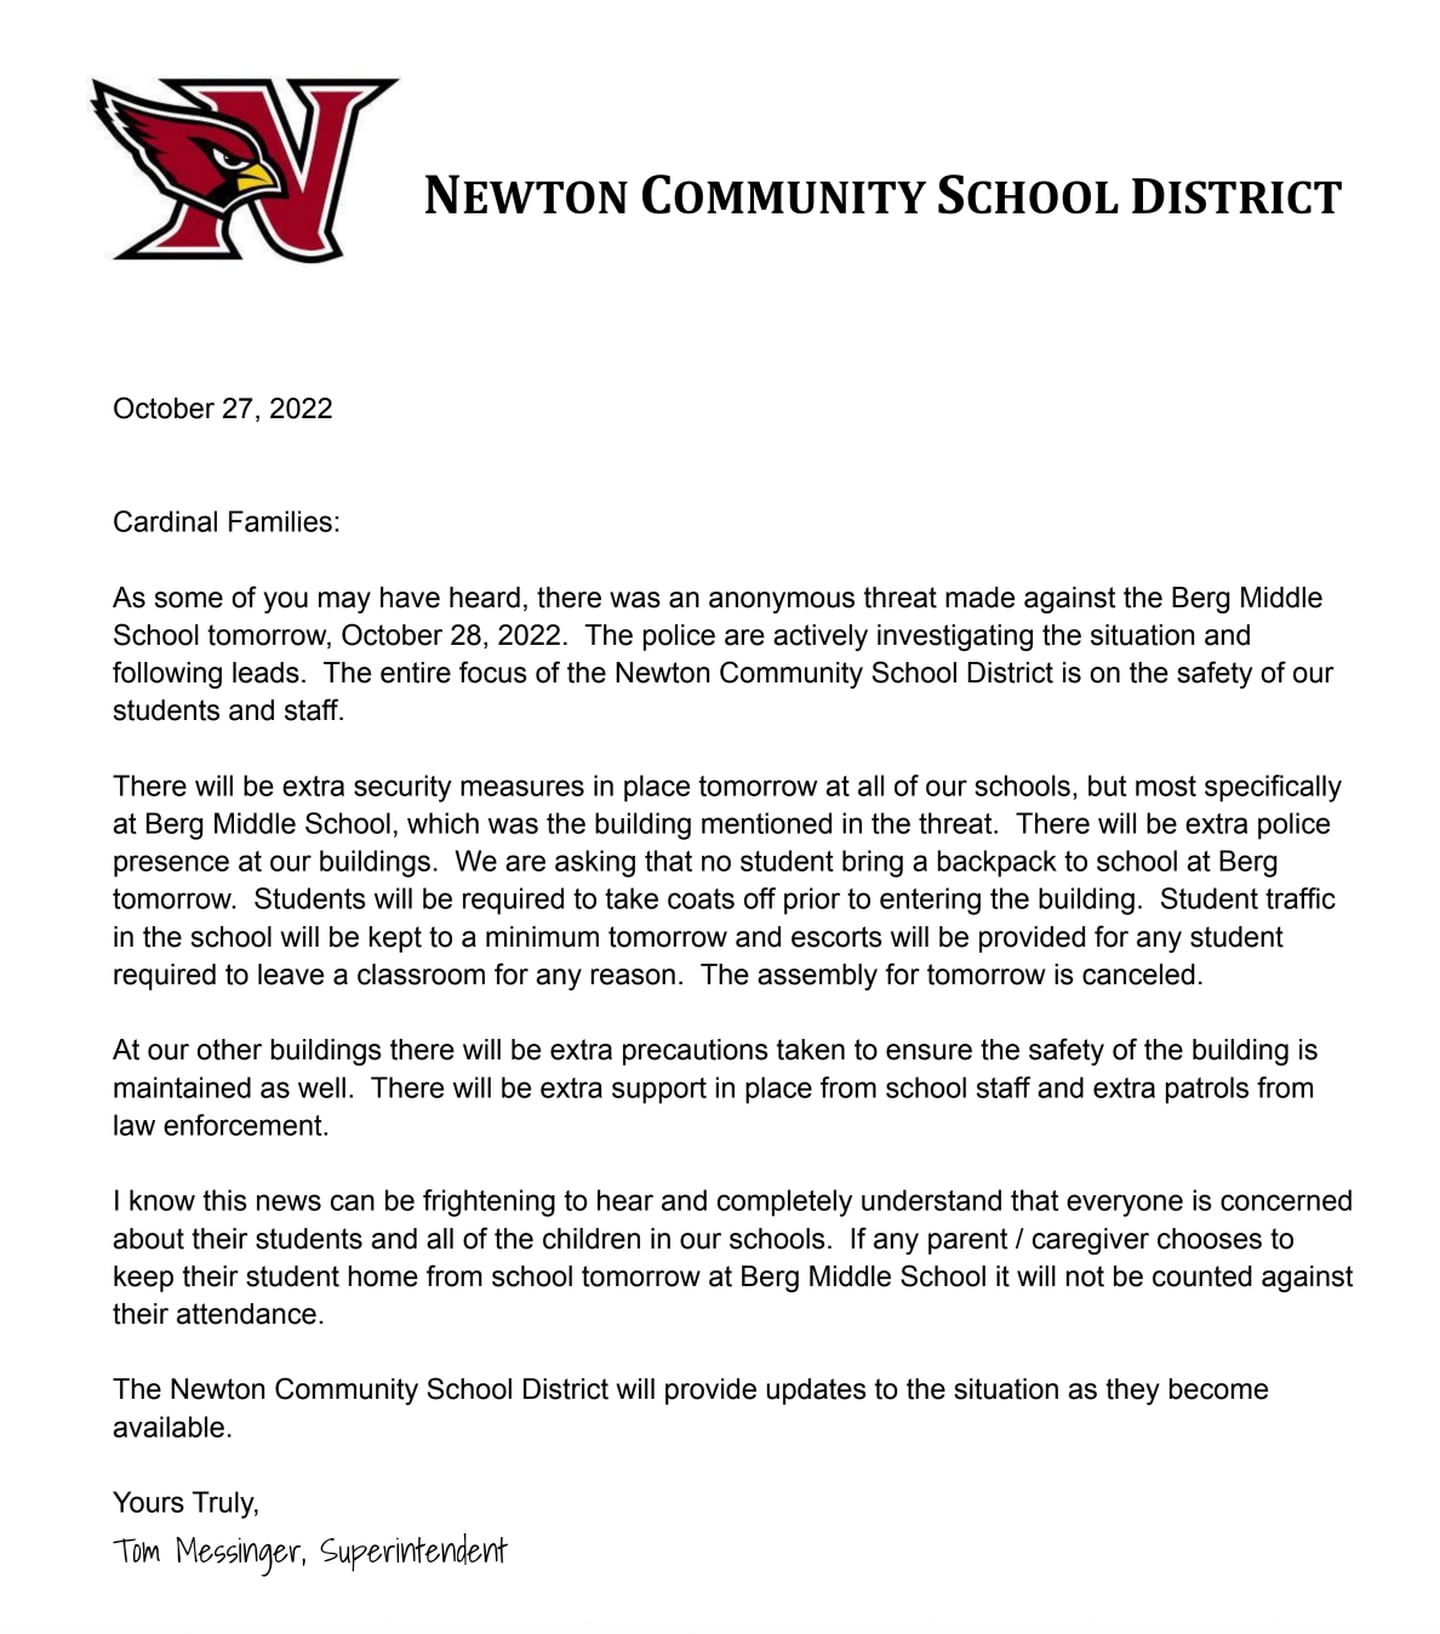 The letter sent by Newton Superintendent Tom Messinger informing families about the threat made against Berg Middle School.